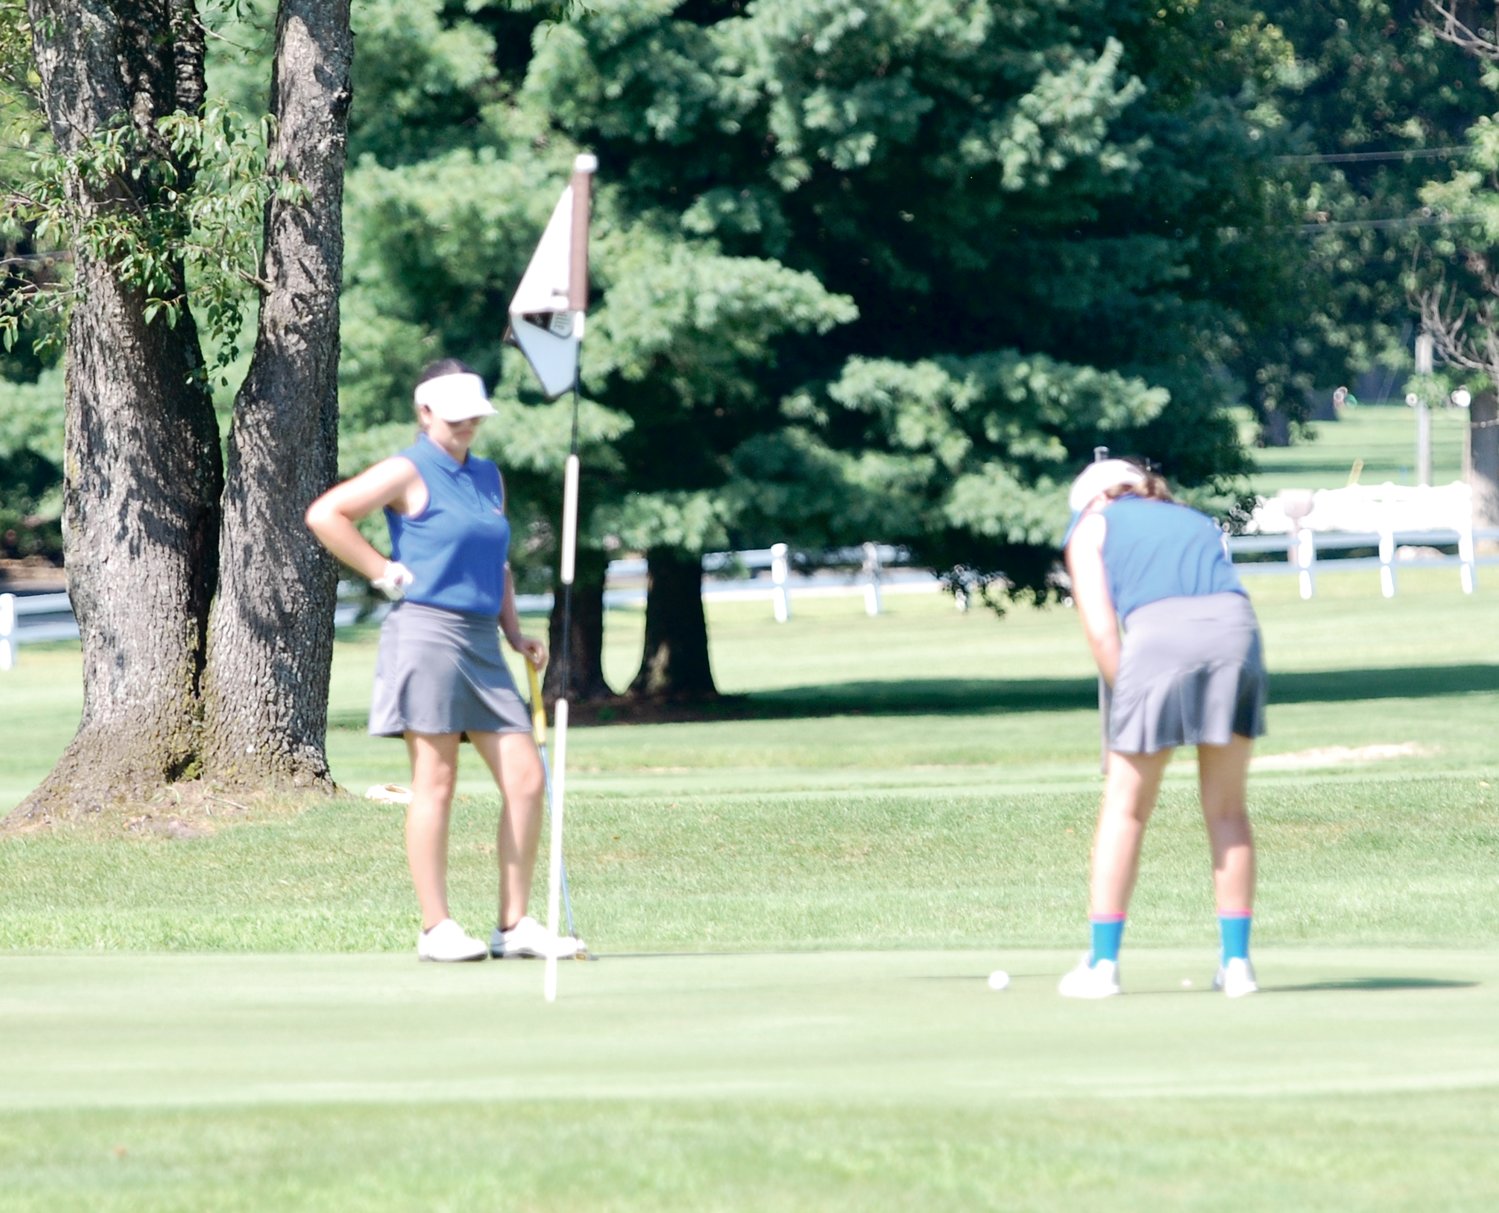 Crawfordsville's Gwyn Redding putts on No. 16 at the Crawfordsville Country Club Saturday afternoon as her sister, Evie Redding looks on. The duo helped the Athenians to a sixth-place finish at the Southmont Invitational.